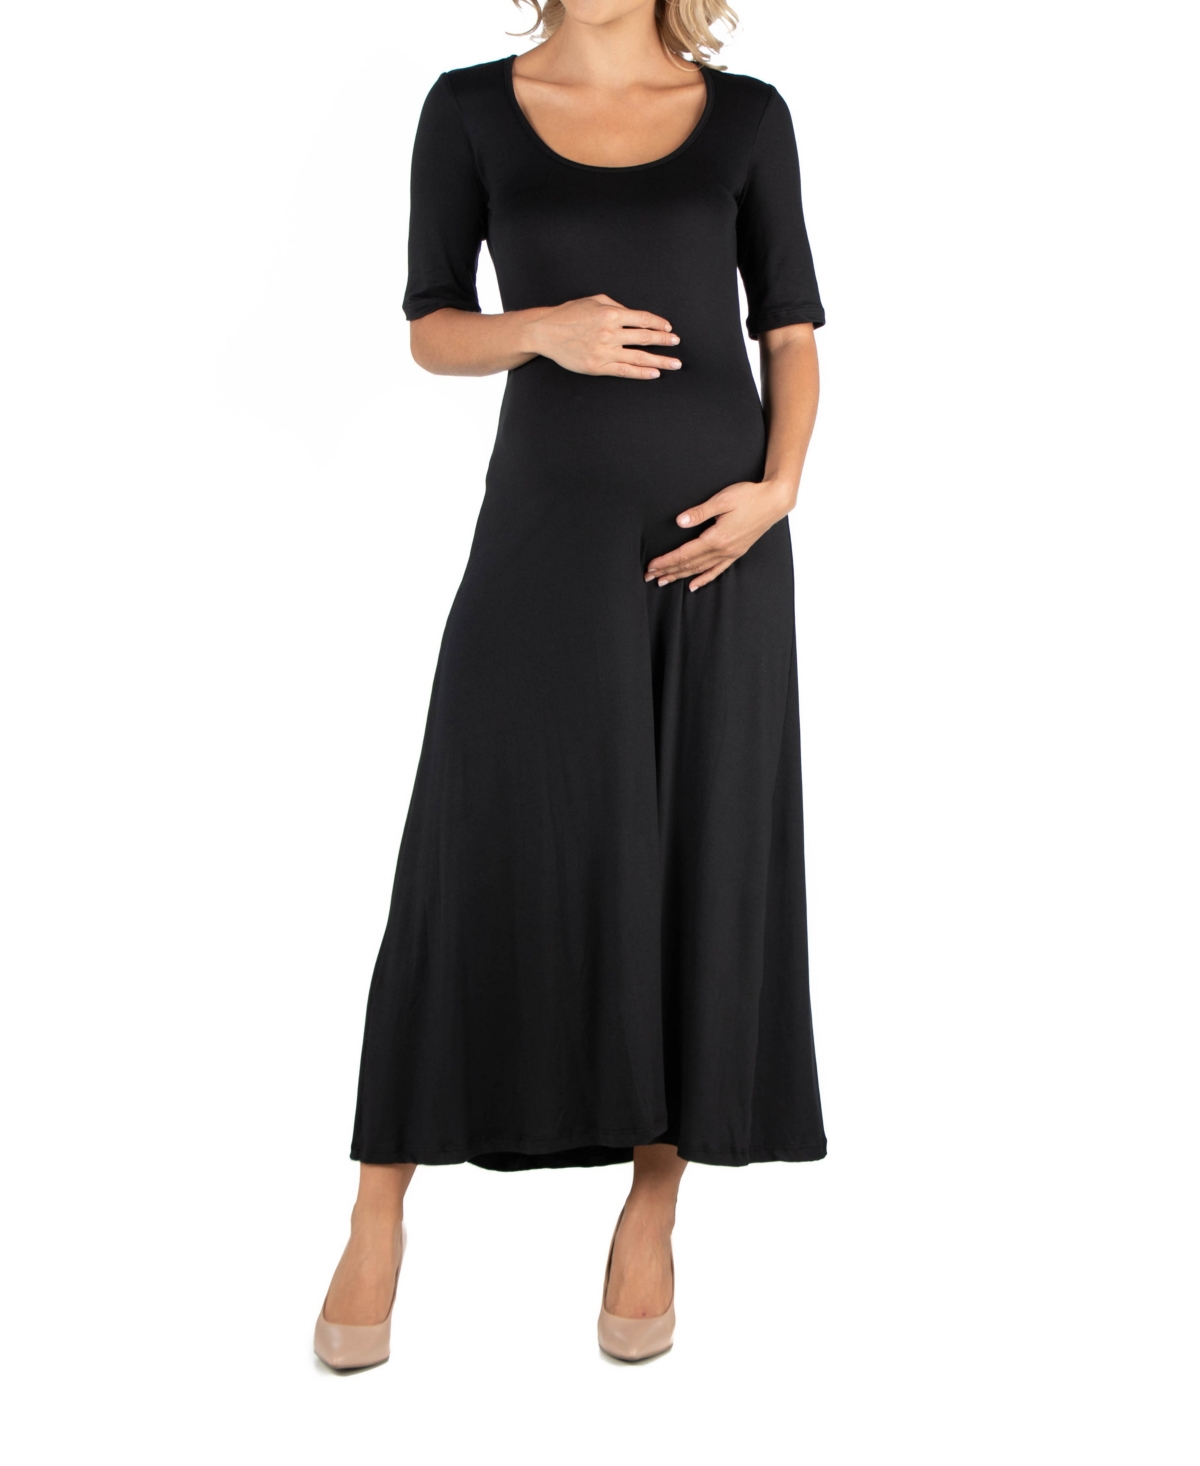 Casual Maternity Maxi Dress with Sleeves - Navy